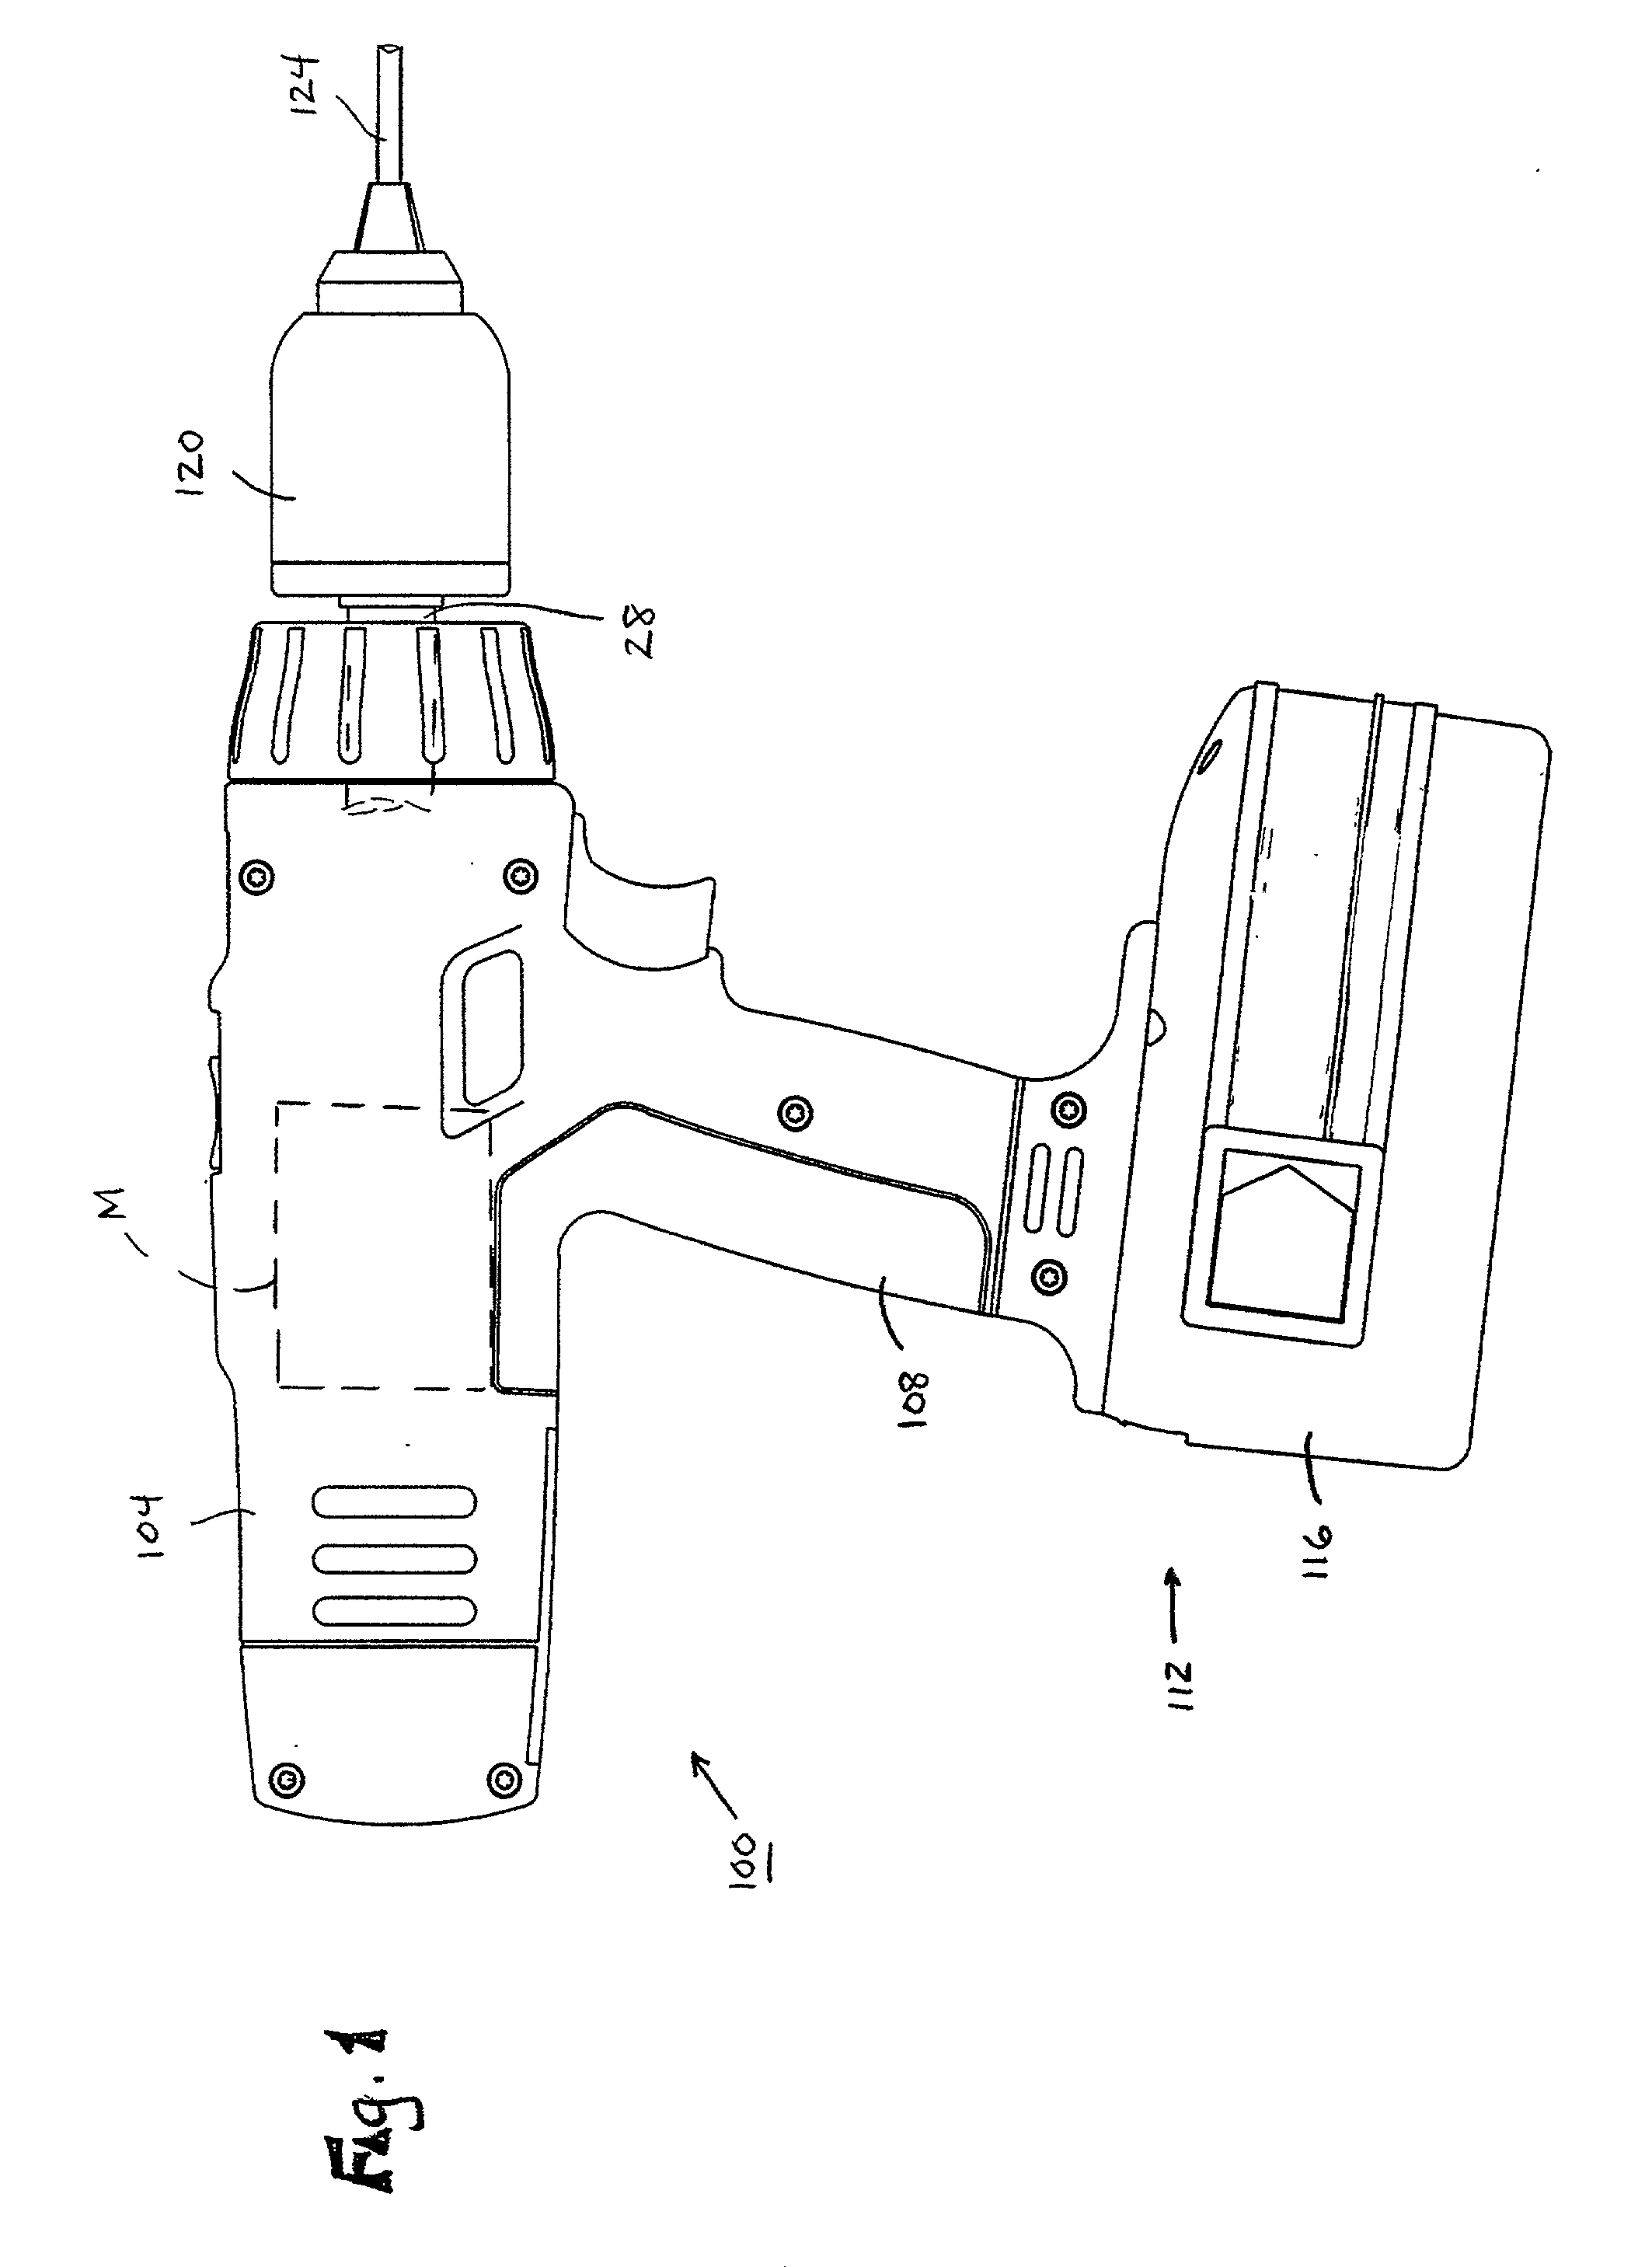 Power tool and spindle lock system